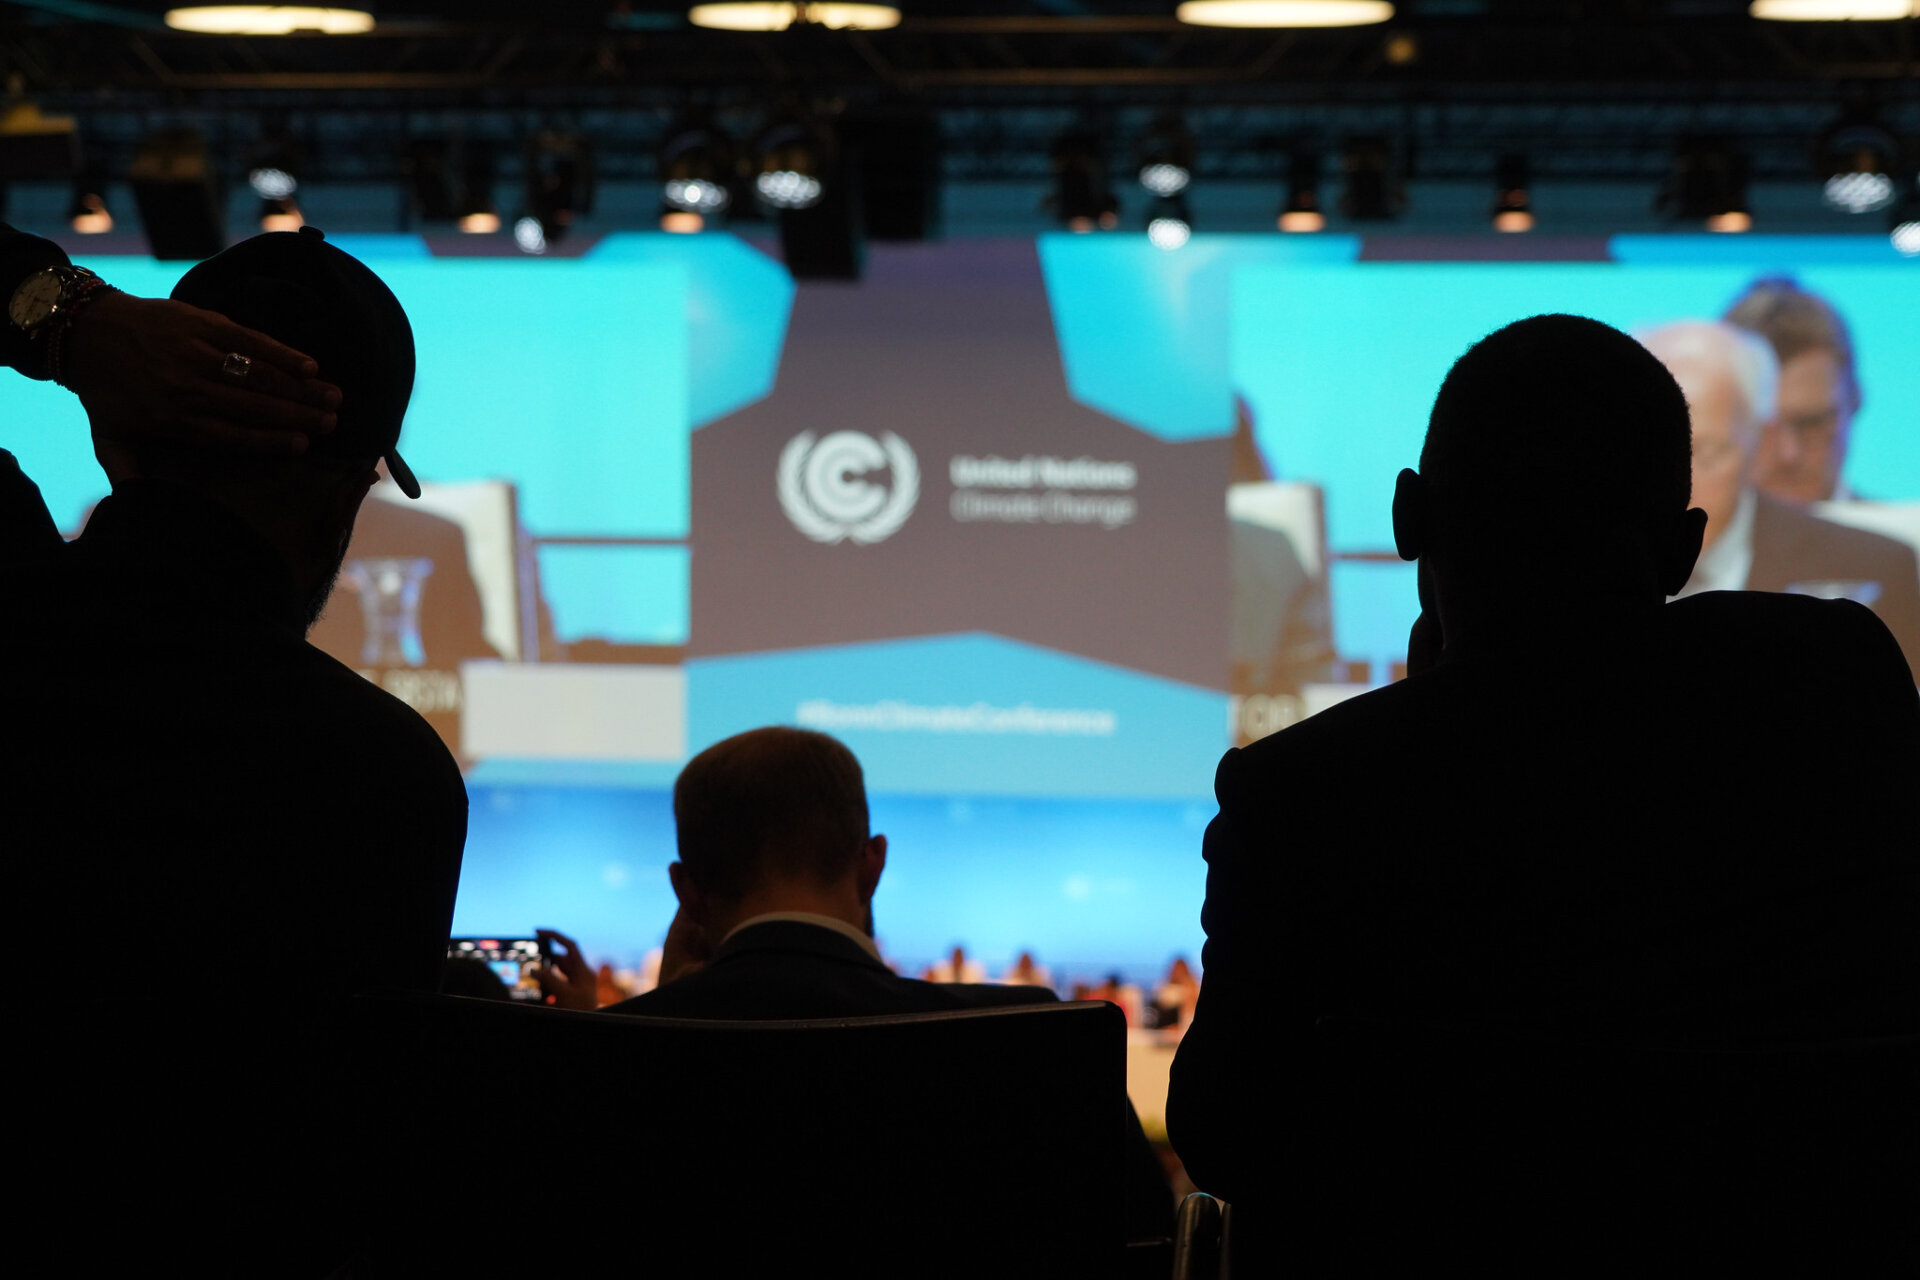 The photo was taken during the Bonn Climate Conference 2023.